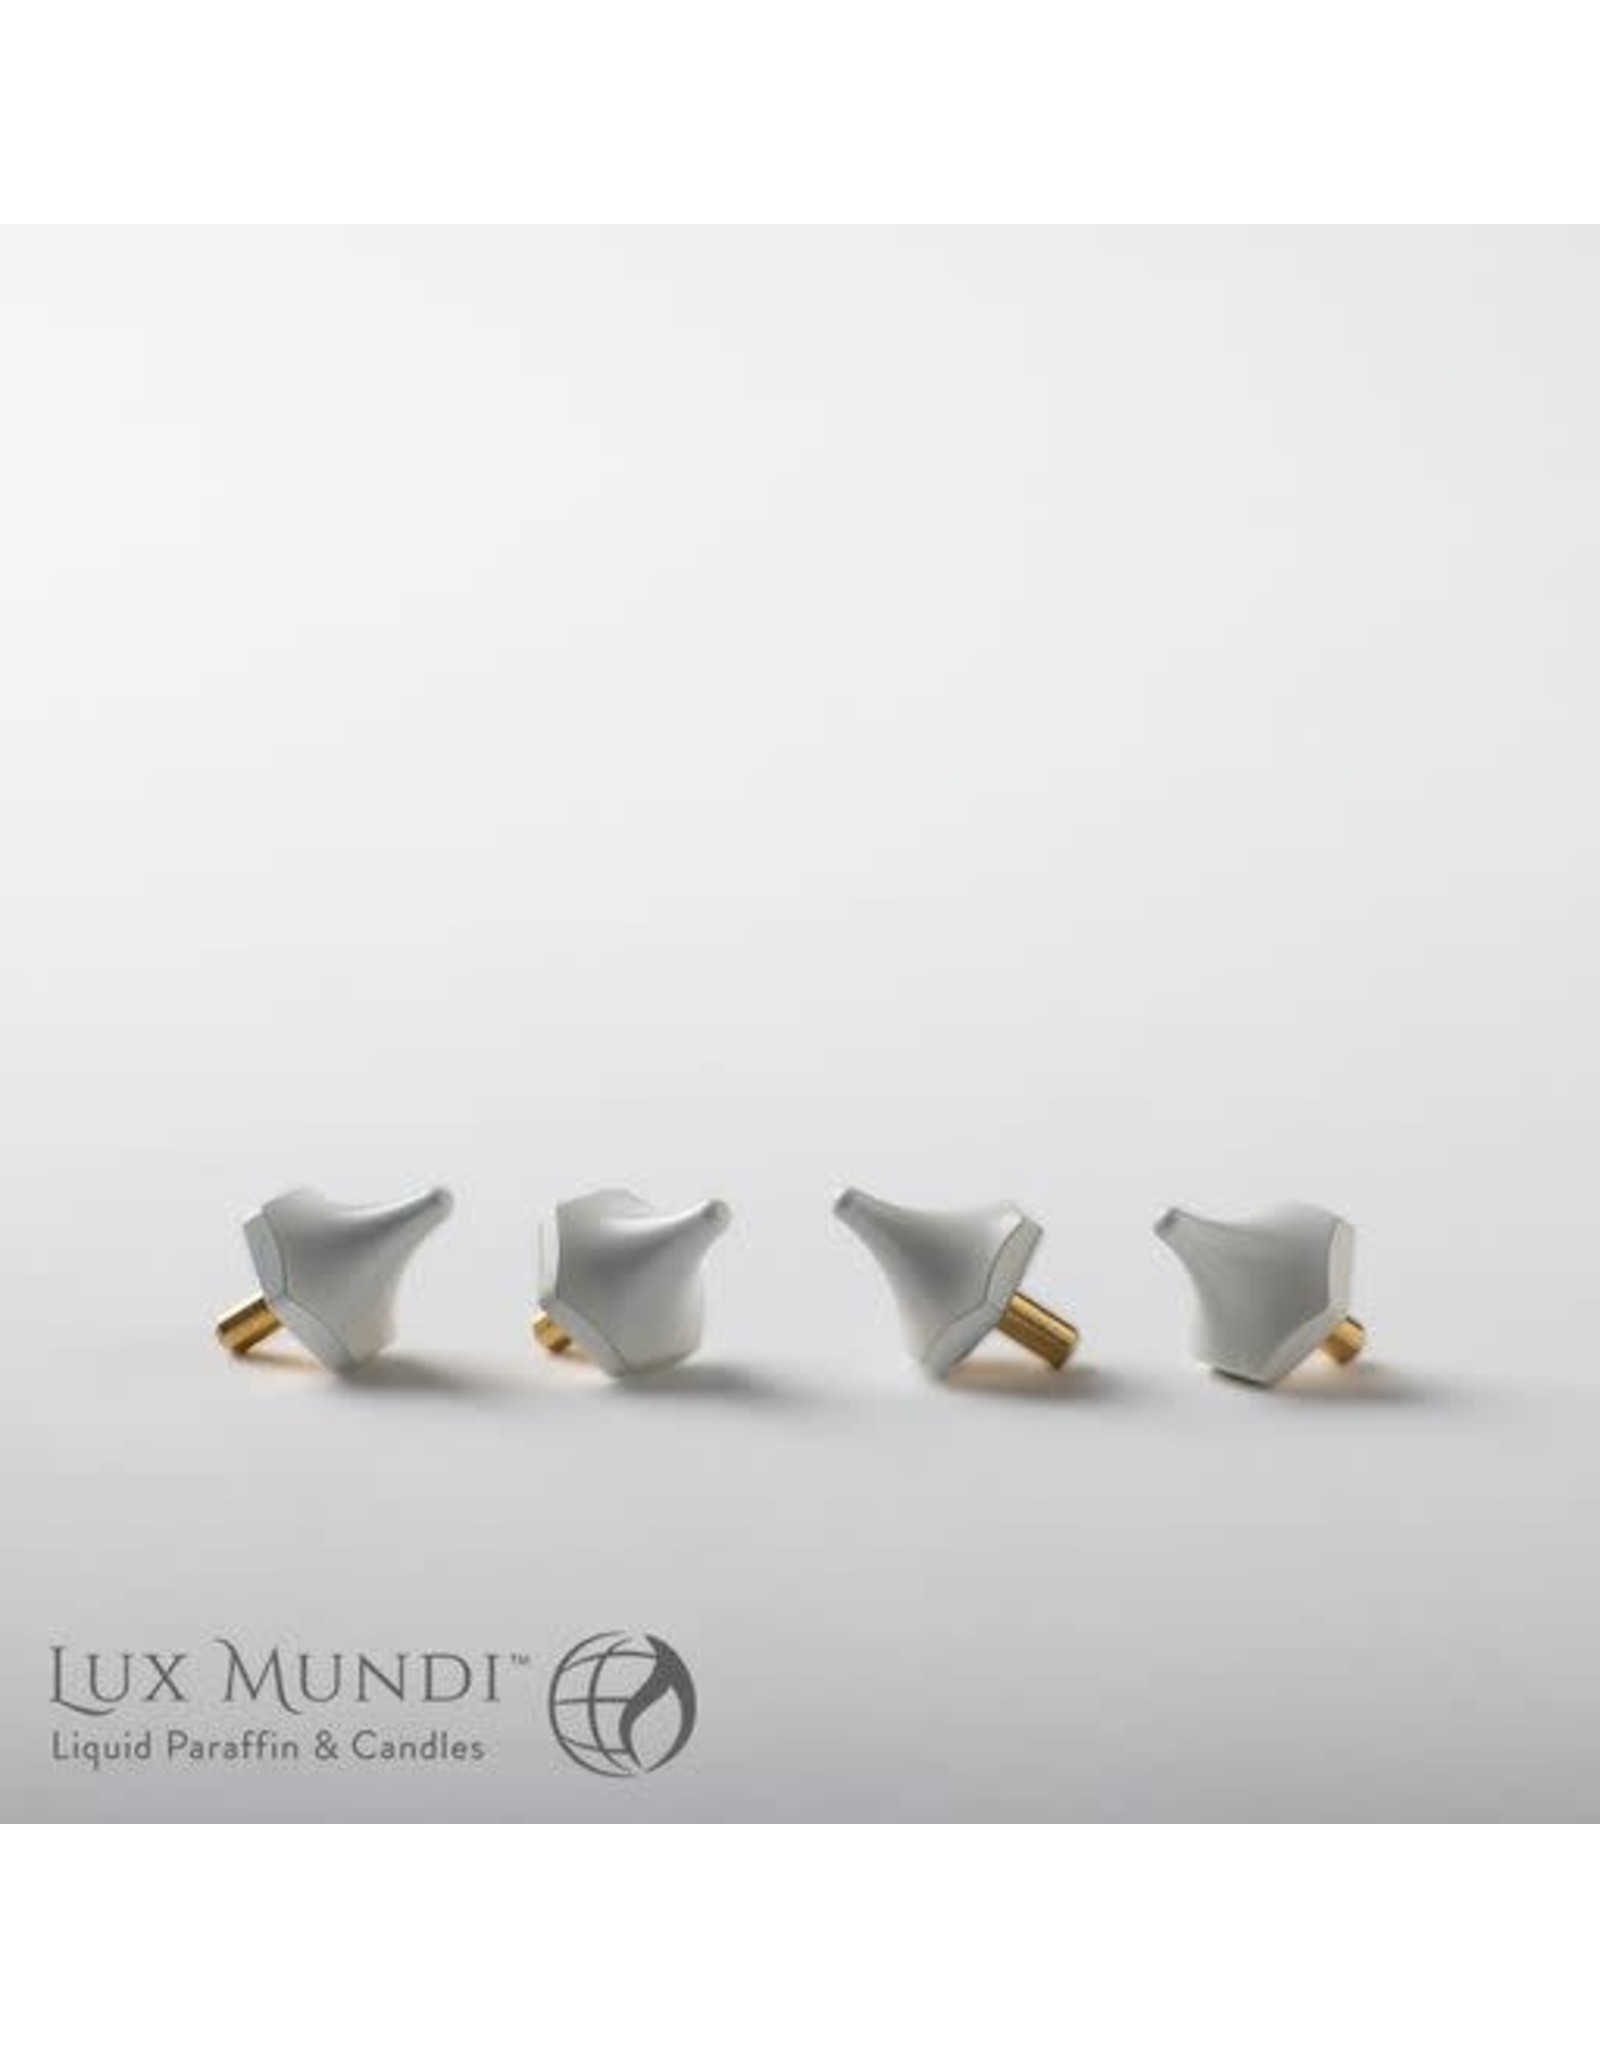 Lux Mundi Nails for Oil Shell - Red, Green or White